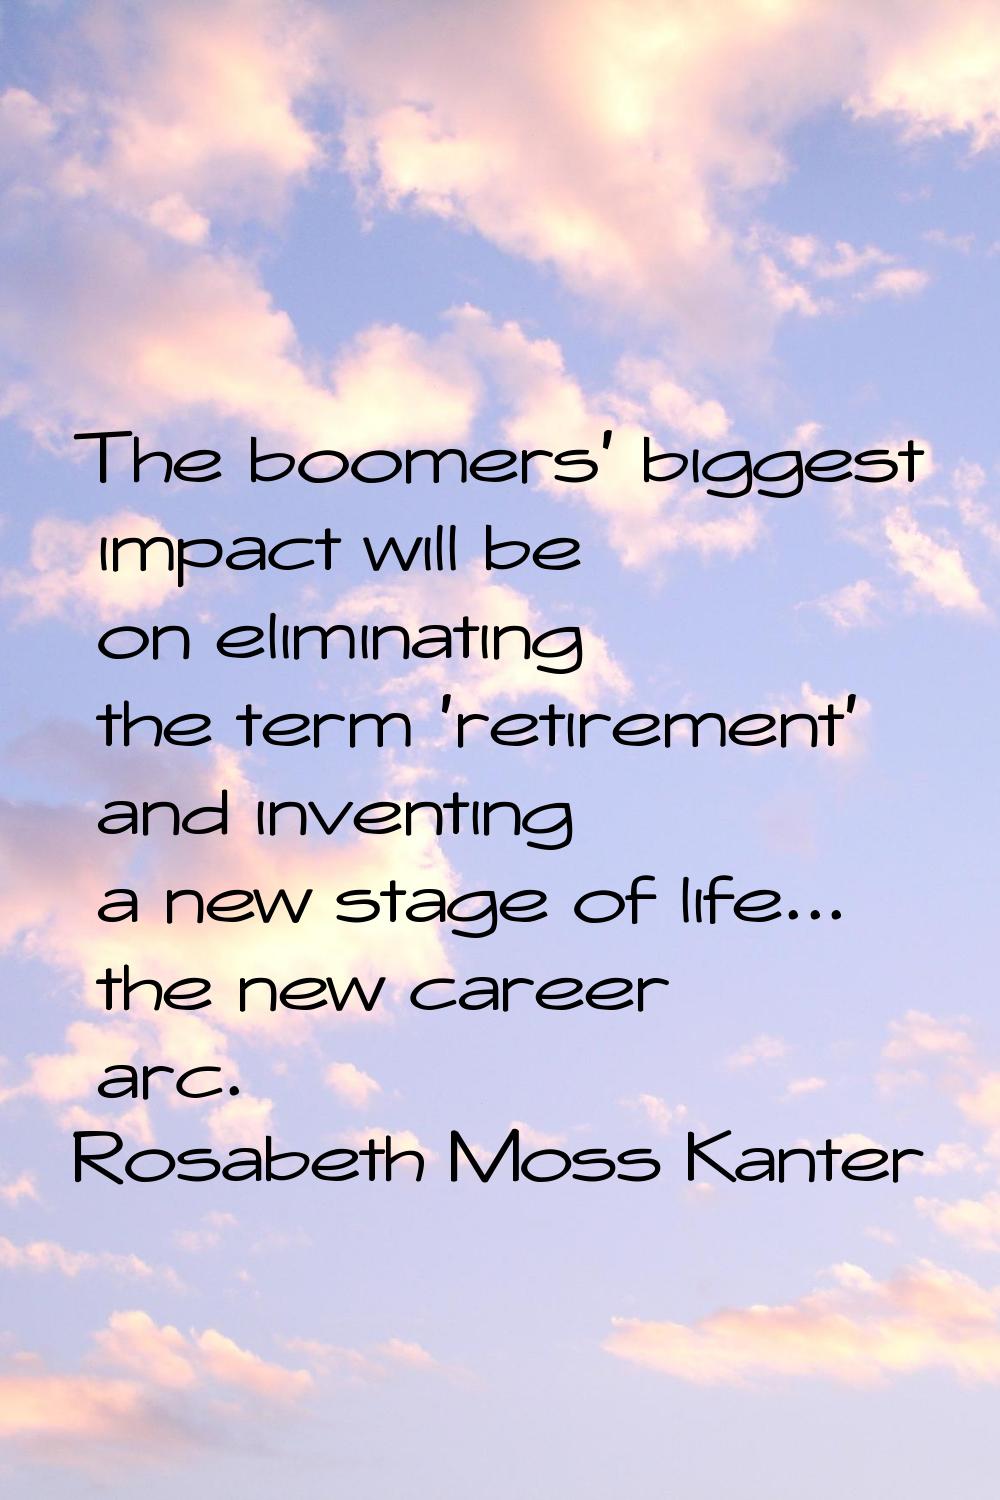 The boomers' biggest impact will be on eliminating the term 'retirement' and inventing a new stage 